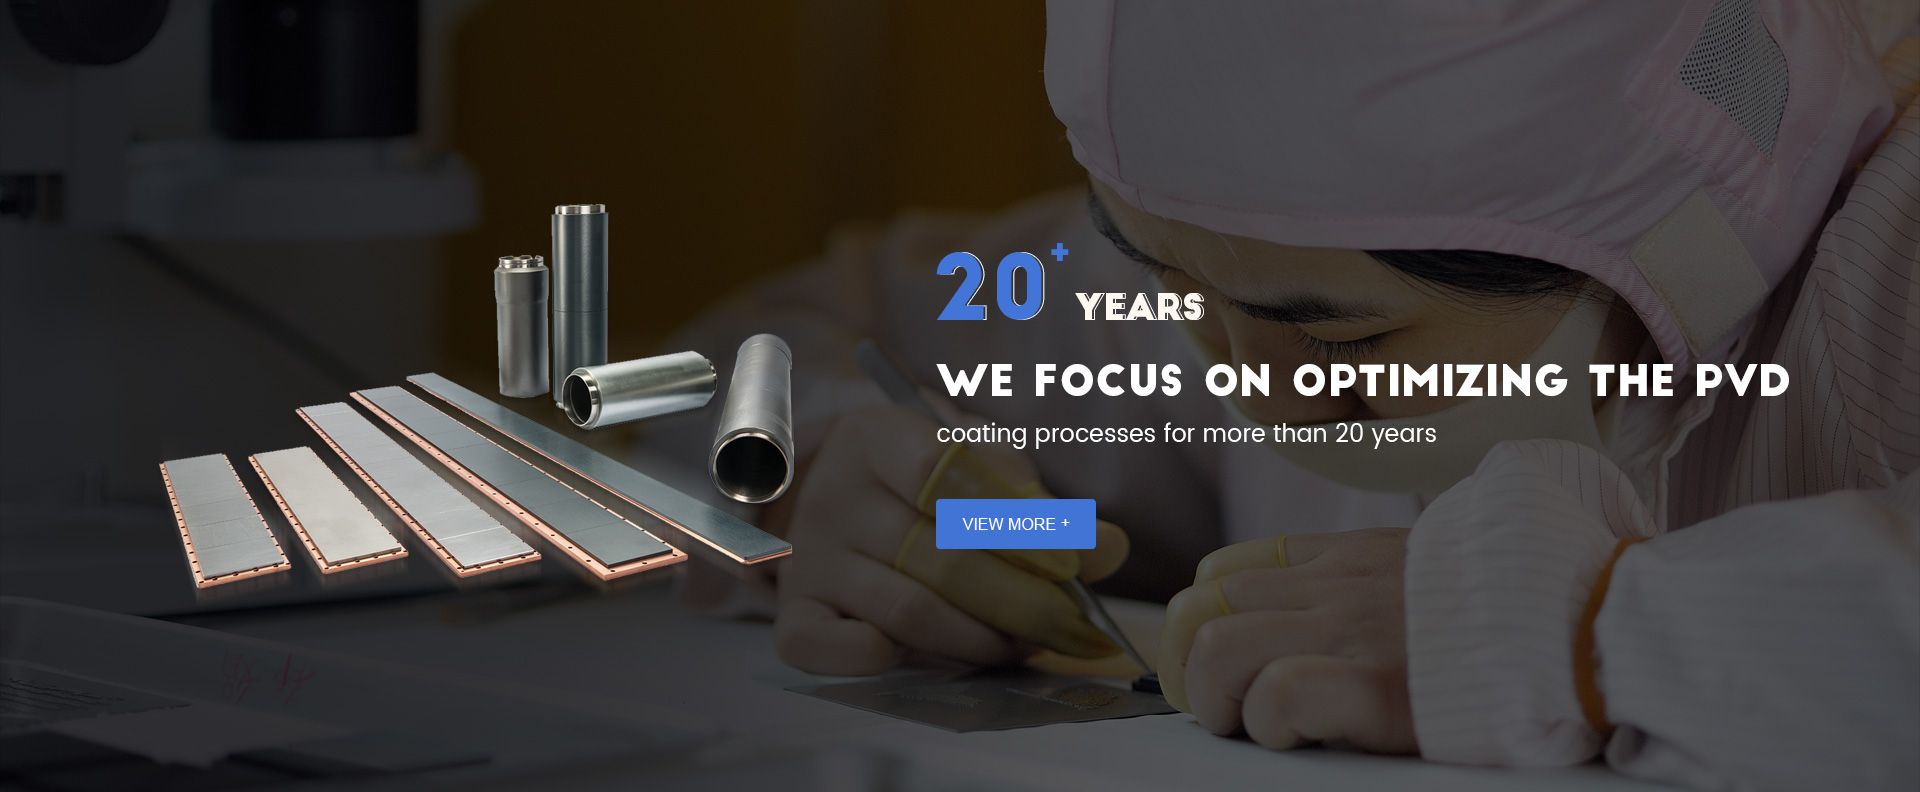 20 years we focus on optimizing the PVD